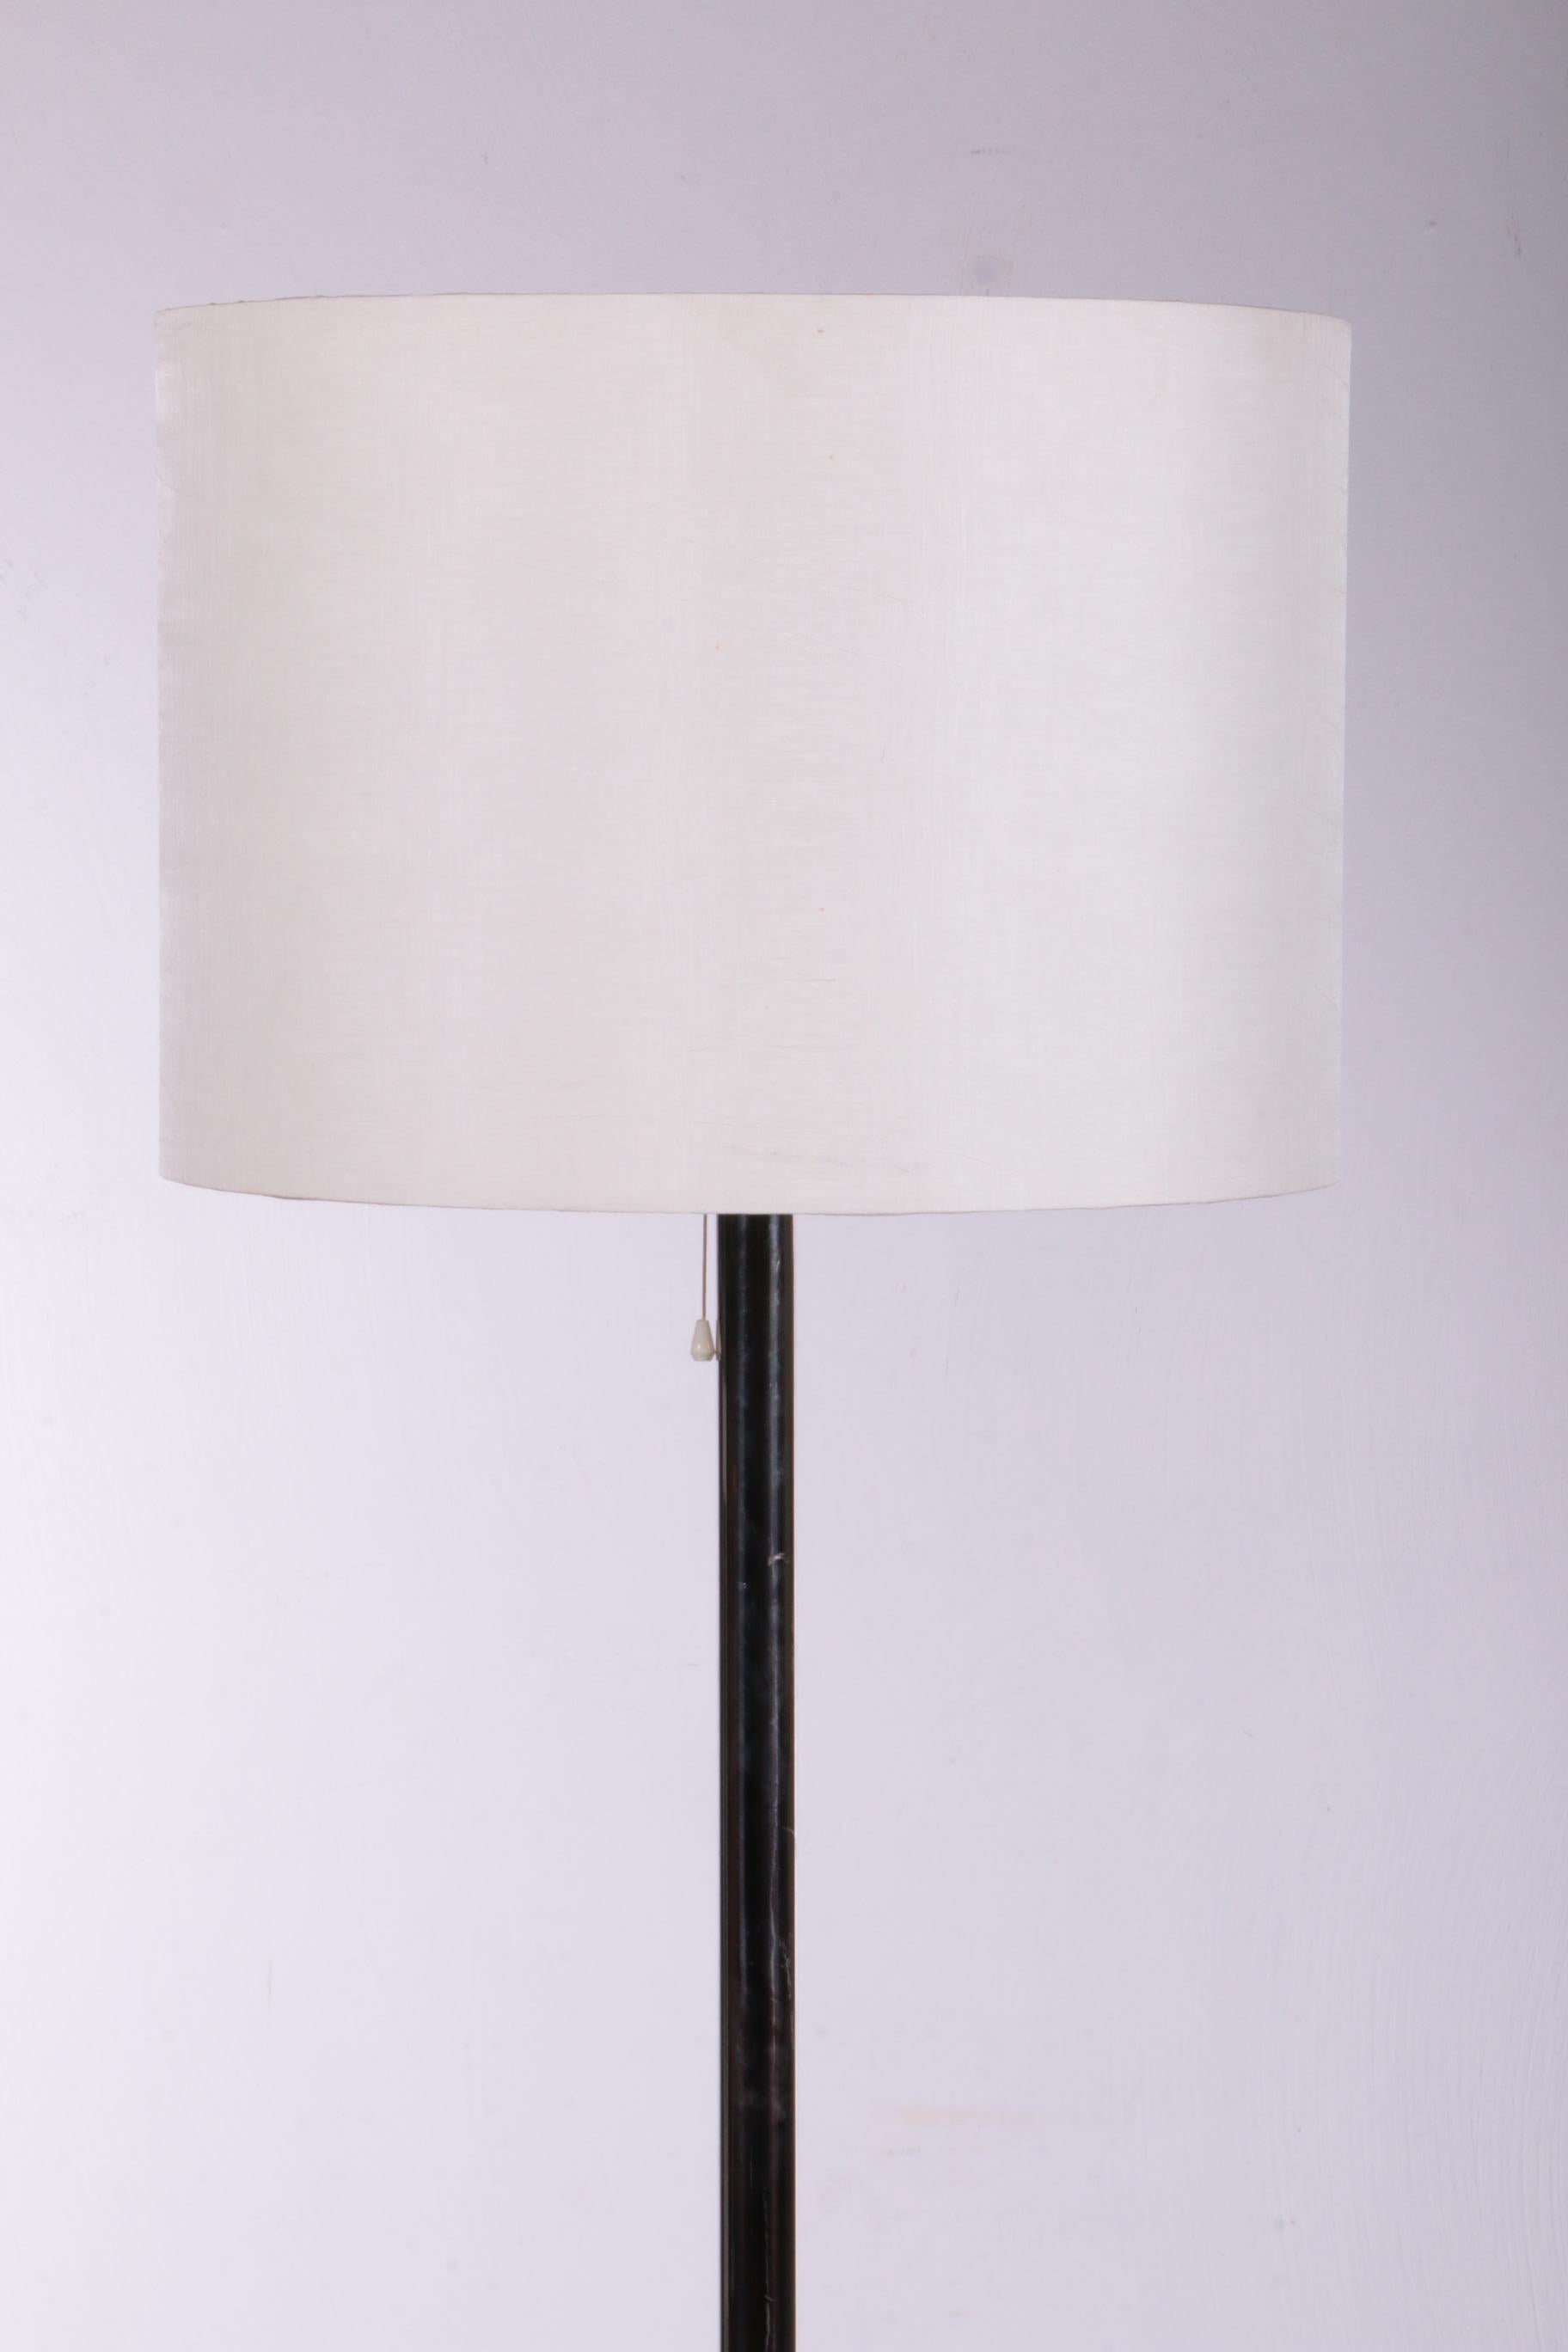 Large Floor Lamp with Chrome Stem and 3 Light Fittings in the Shade by Temde For Sale 7